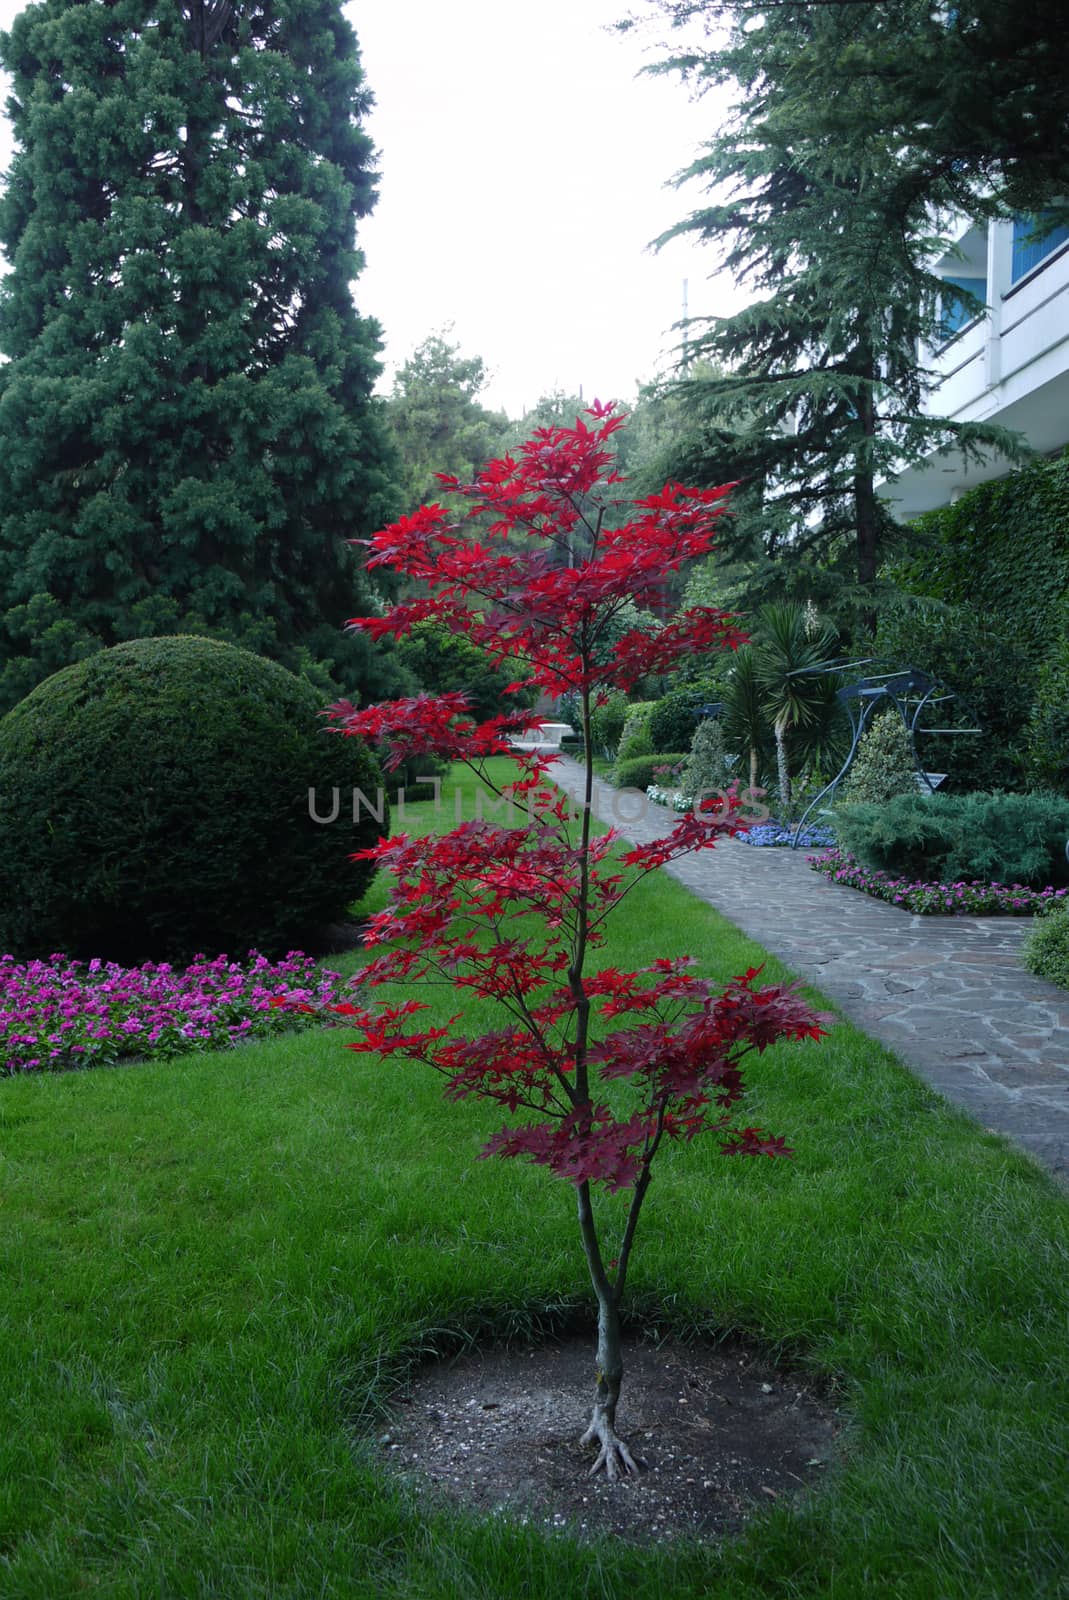 A planted young tree with small red leaves against the backgroun by Adamchuk